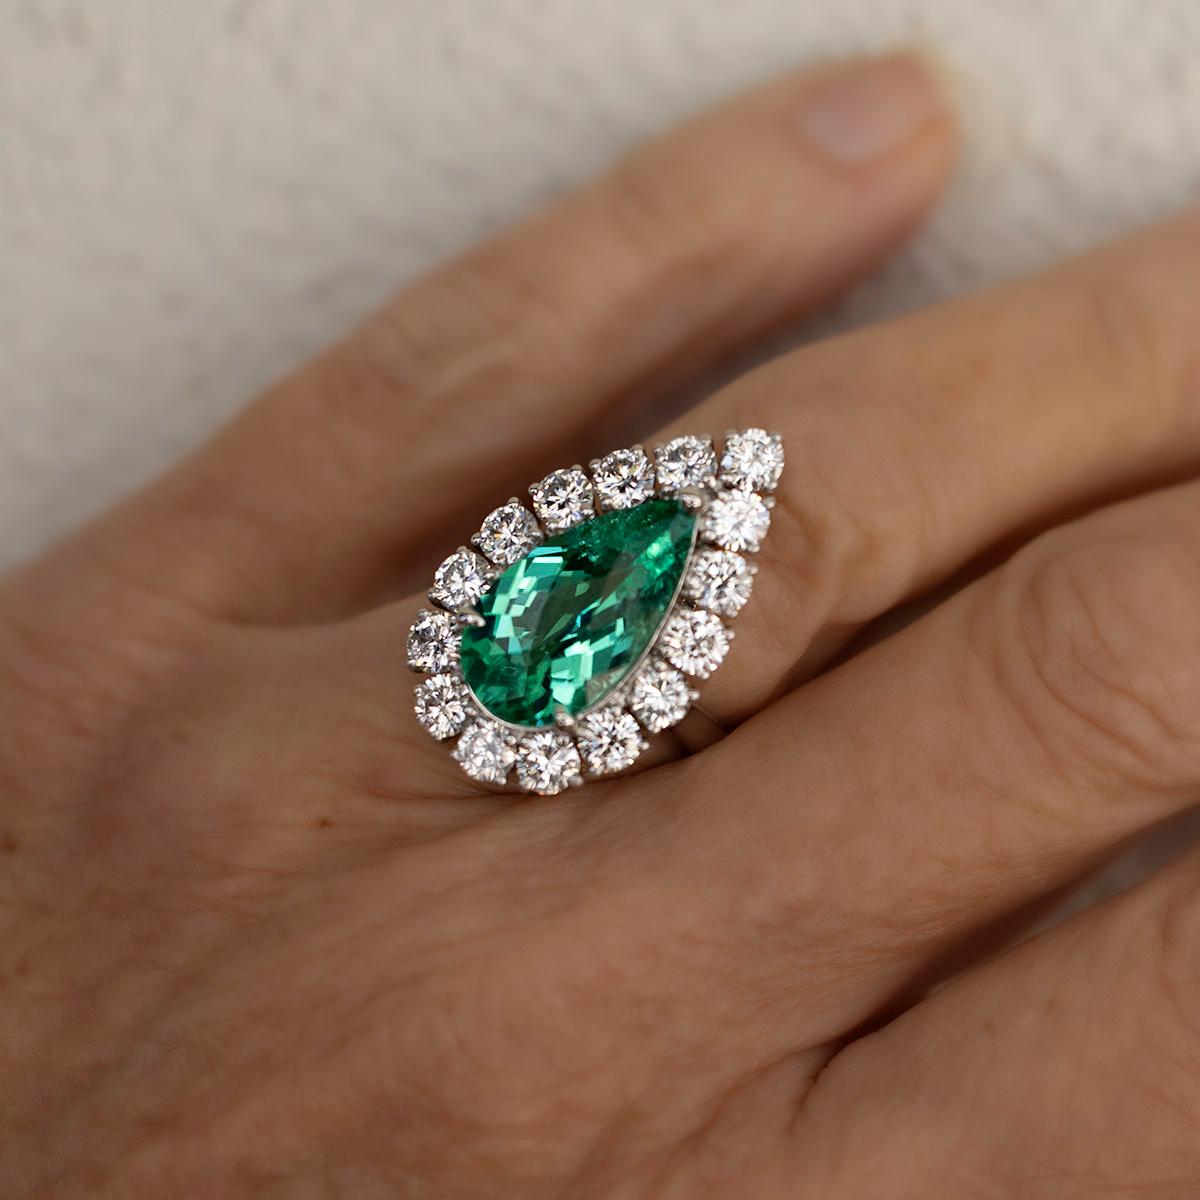 Platinum ring with a GRS certified 5.58 carat pear shape Paraiba Tourmaline and 15 round brilliant diamonds weighing 2.41 carats.